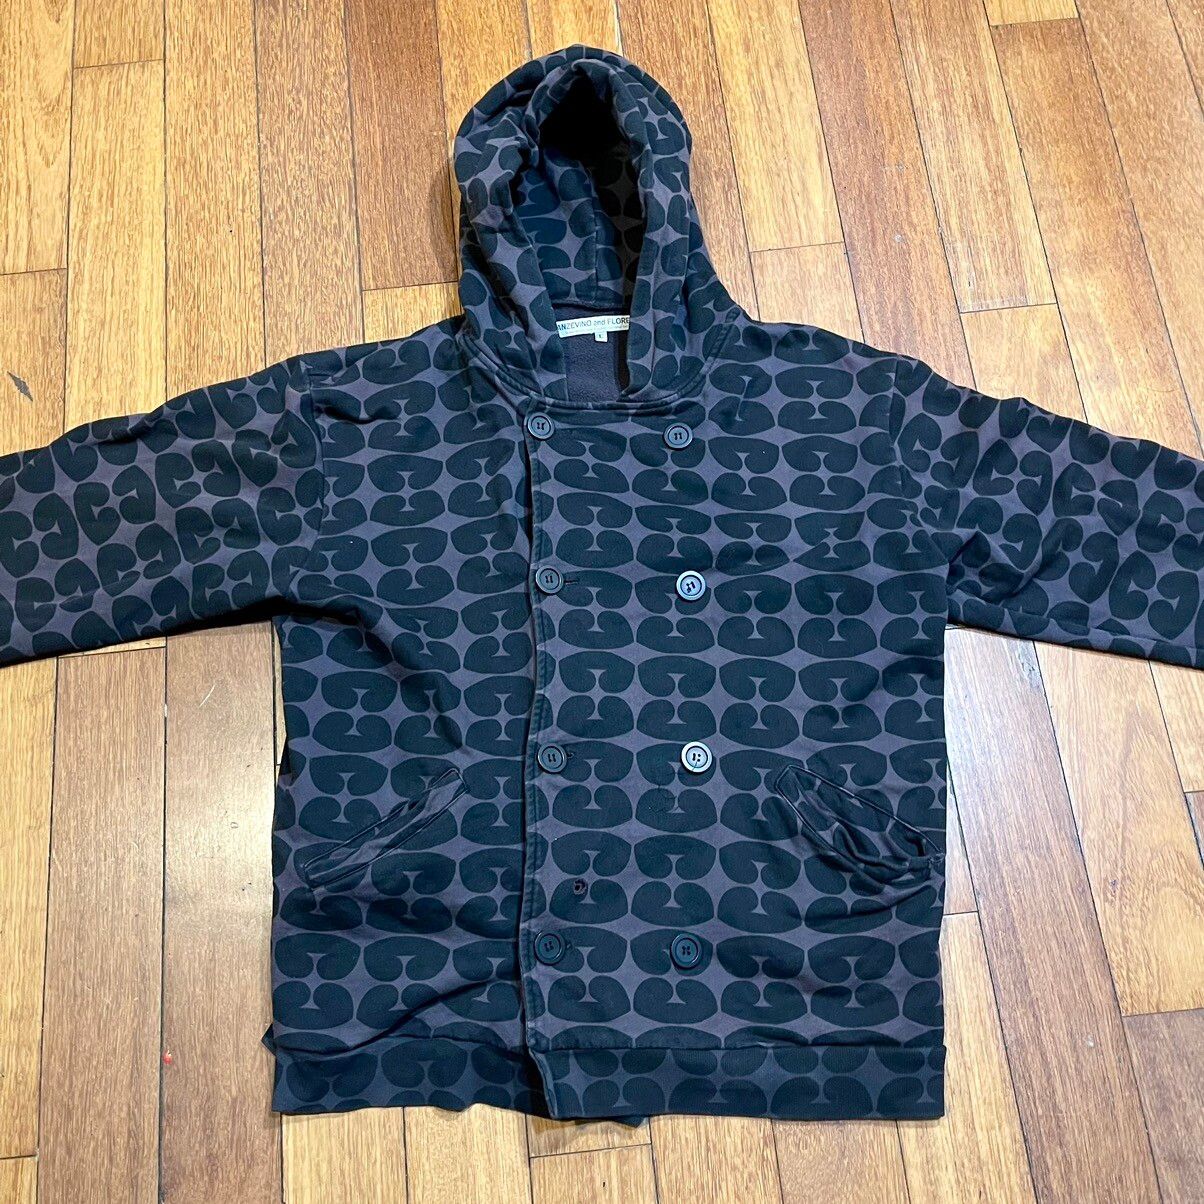 Vintage BLACK AND DARK BURGUNDY ANZEVINO AND FLORENCE HOODIE! Size US L / EU 52-54 / 3 - 2 Preview